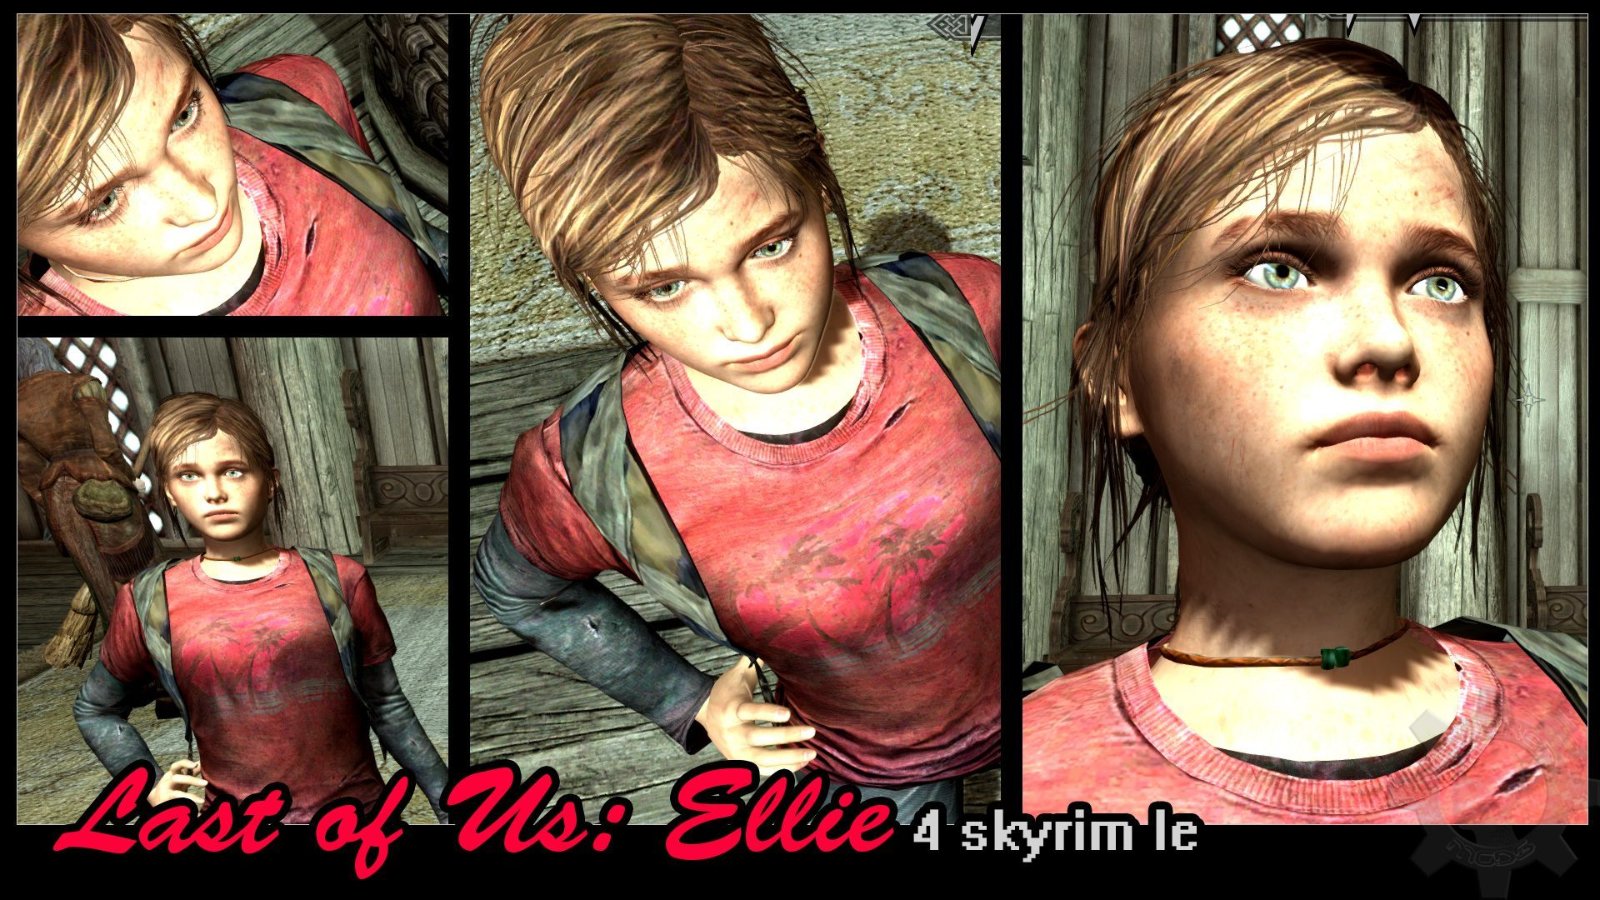 Ellie has an NPC companion in The Last of Us Part 2